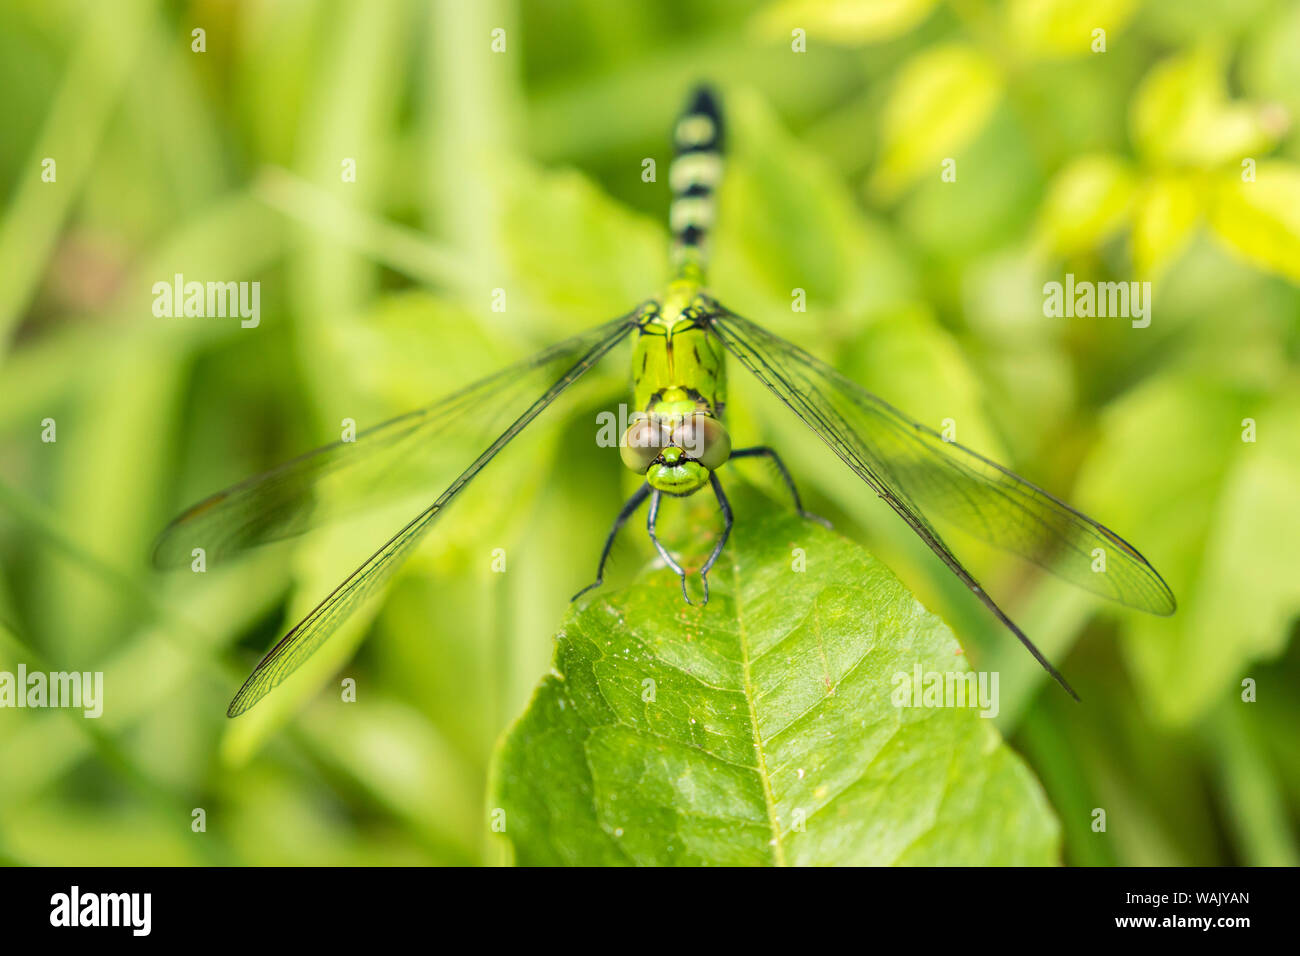 USA, Louisiana, Lake Martin. Green clearwing dragonfly close-up. Credit as: Cathy and Gordon Illg / Jaynes Gallery / DanitaDelimont.com Stock Photo